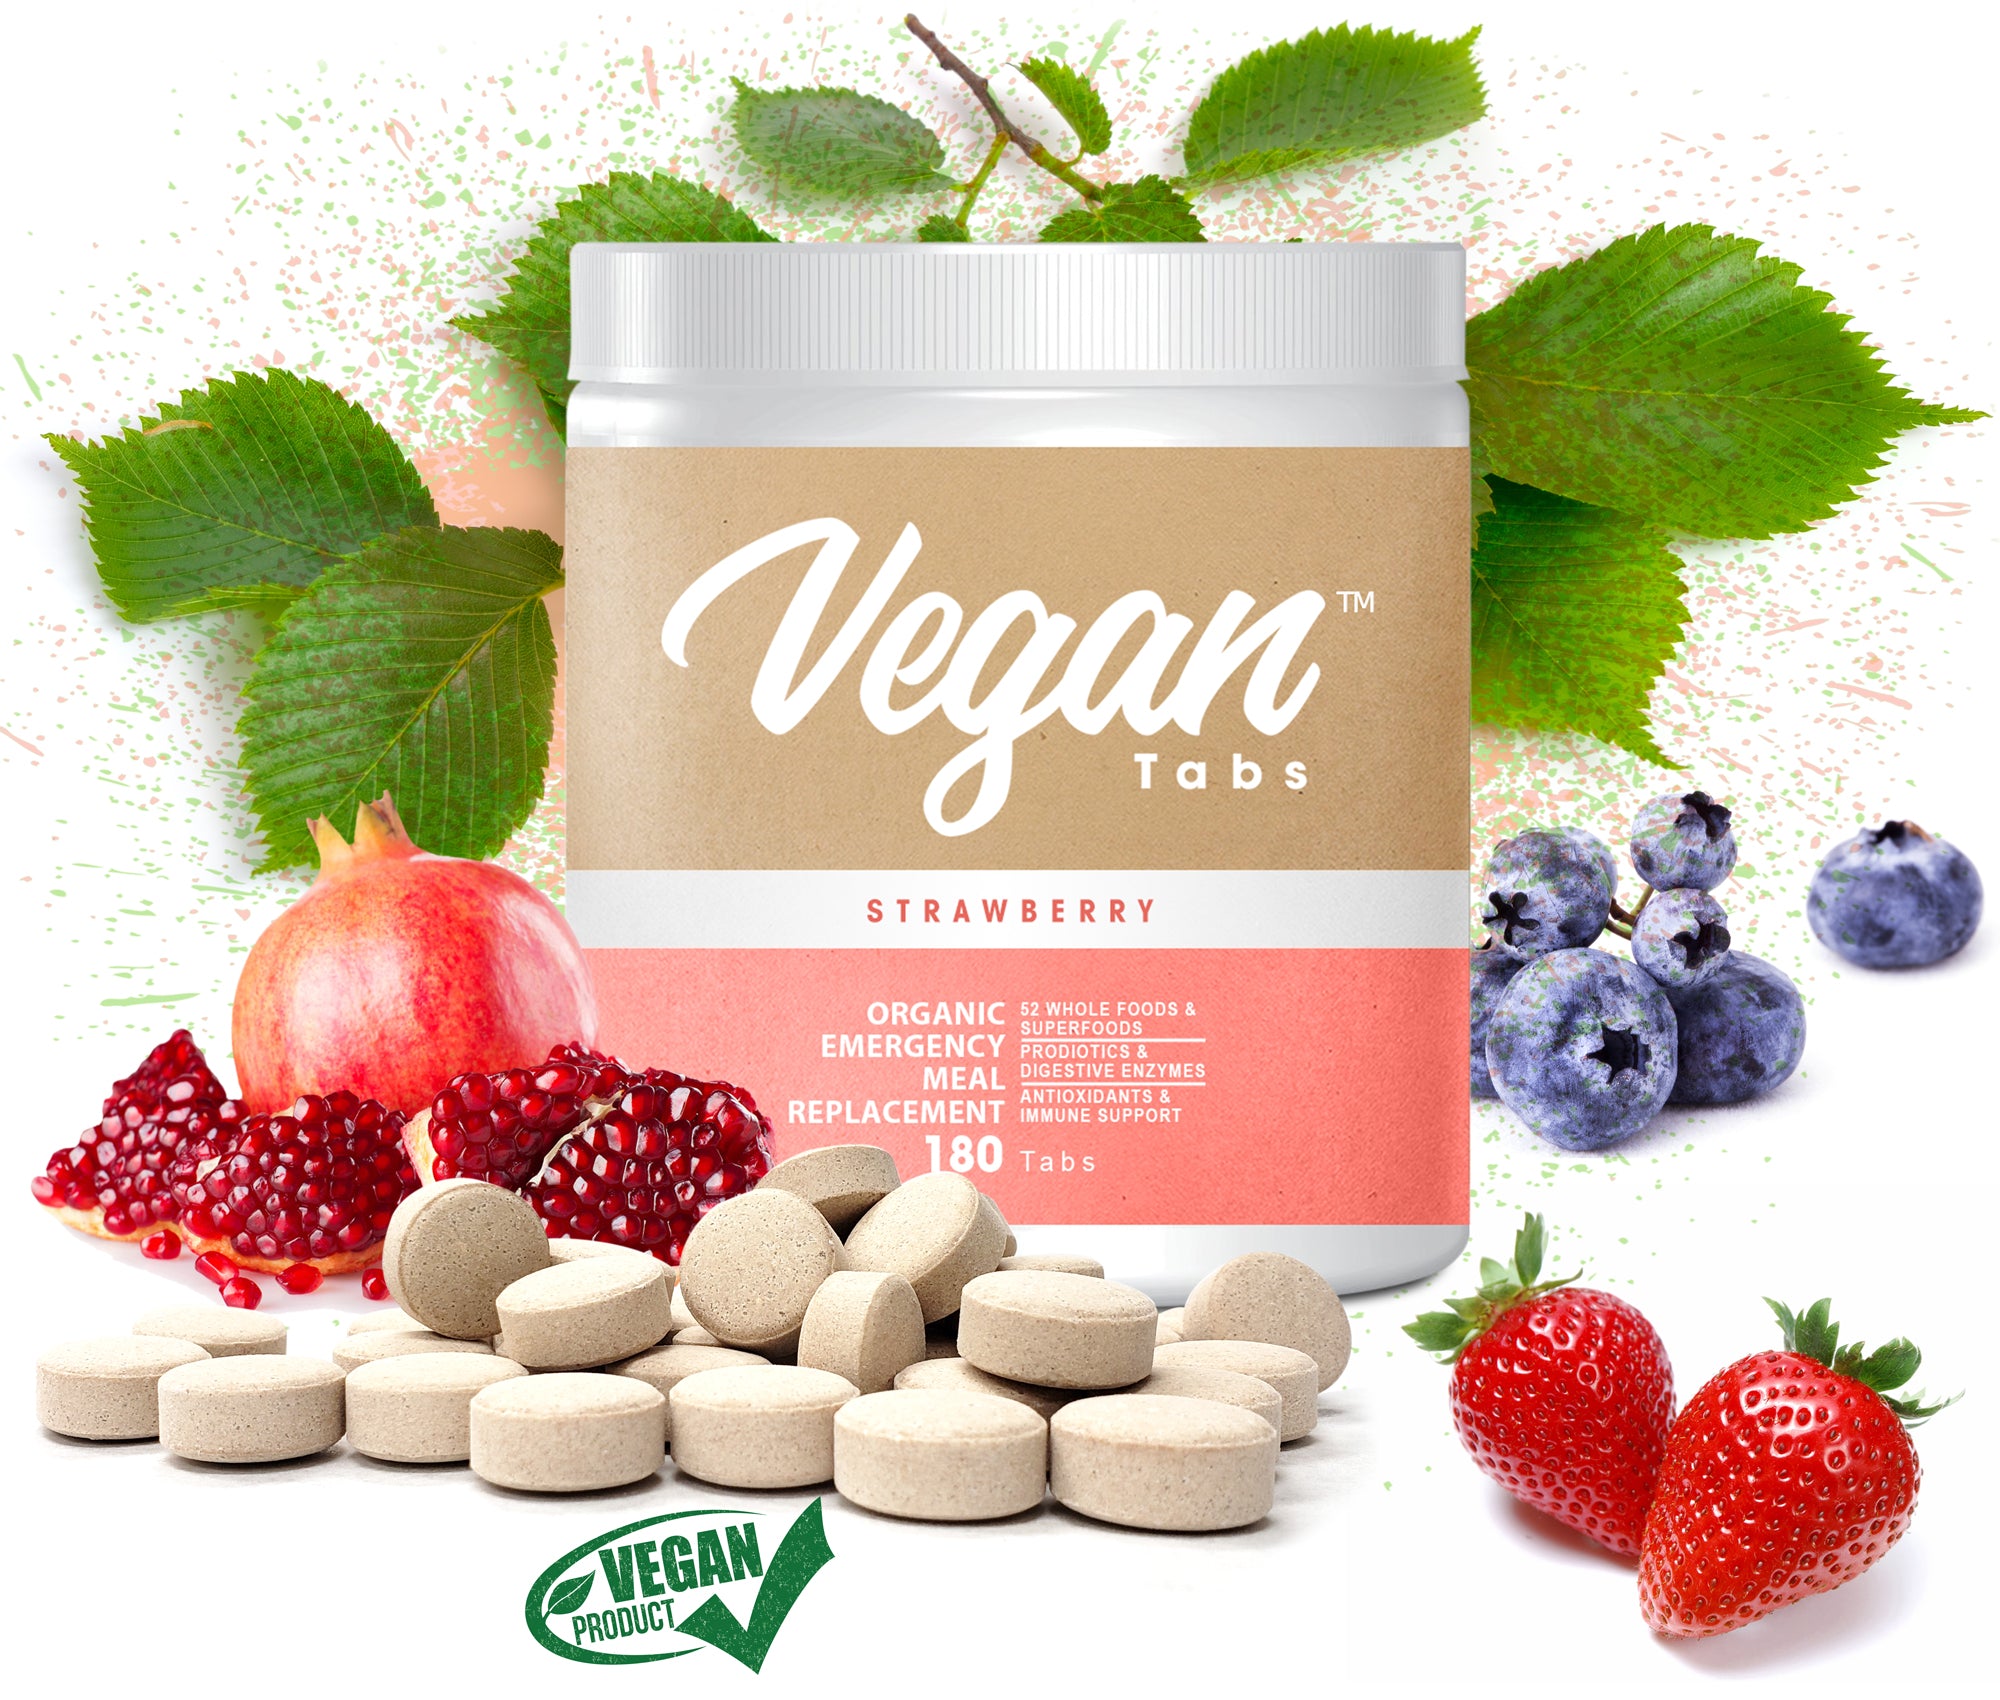 100% Pure Organic Plant-Based Vegan Protein tablets - Easy to Digest, Natural Unflavored, Dairy Free, Gluten Free, Soy Free, Sugar-Free, Non-GMO with BCAA 180 tablets, Strawberry